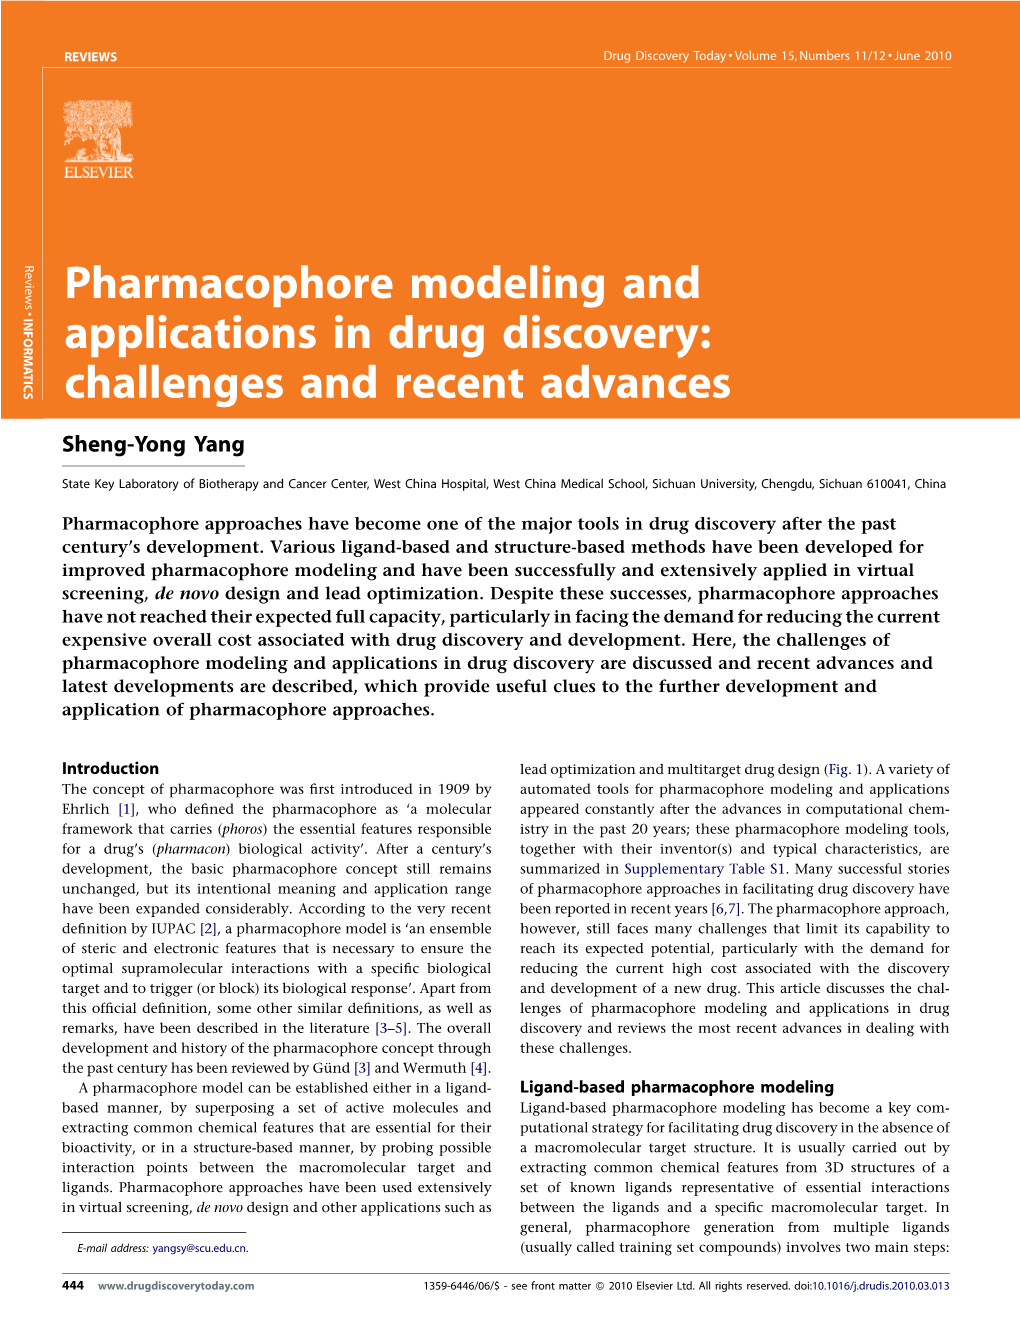 Pharmacophore Modeling and Applications in Drug Discovery